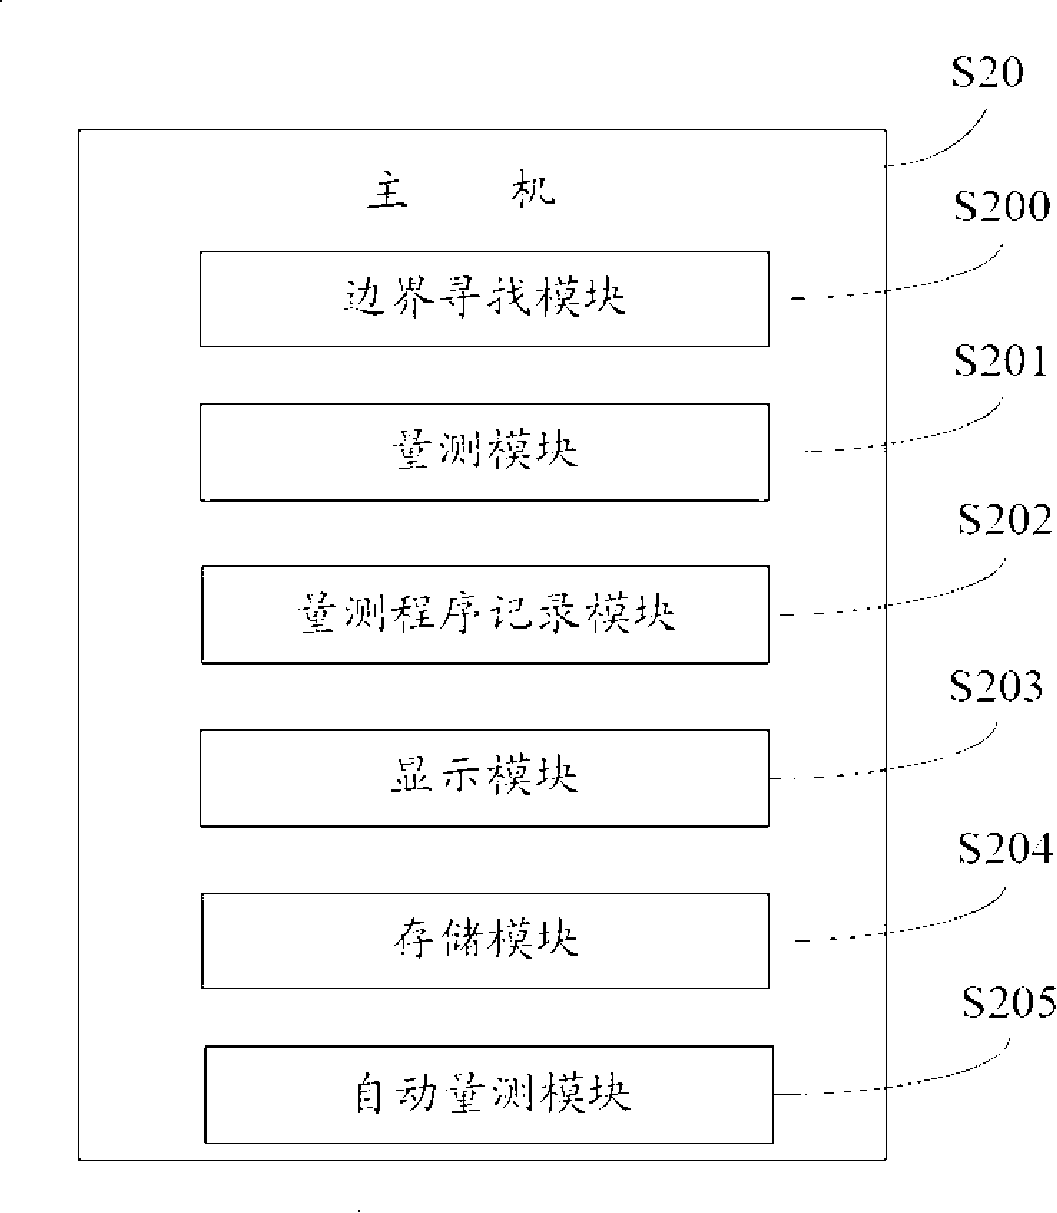 Image measuring system and method